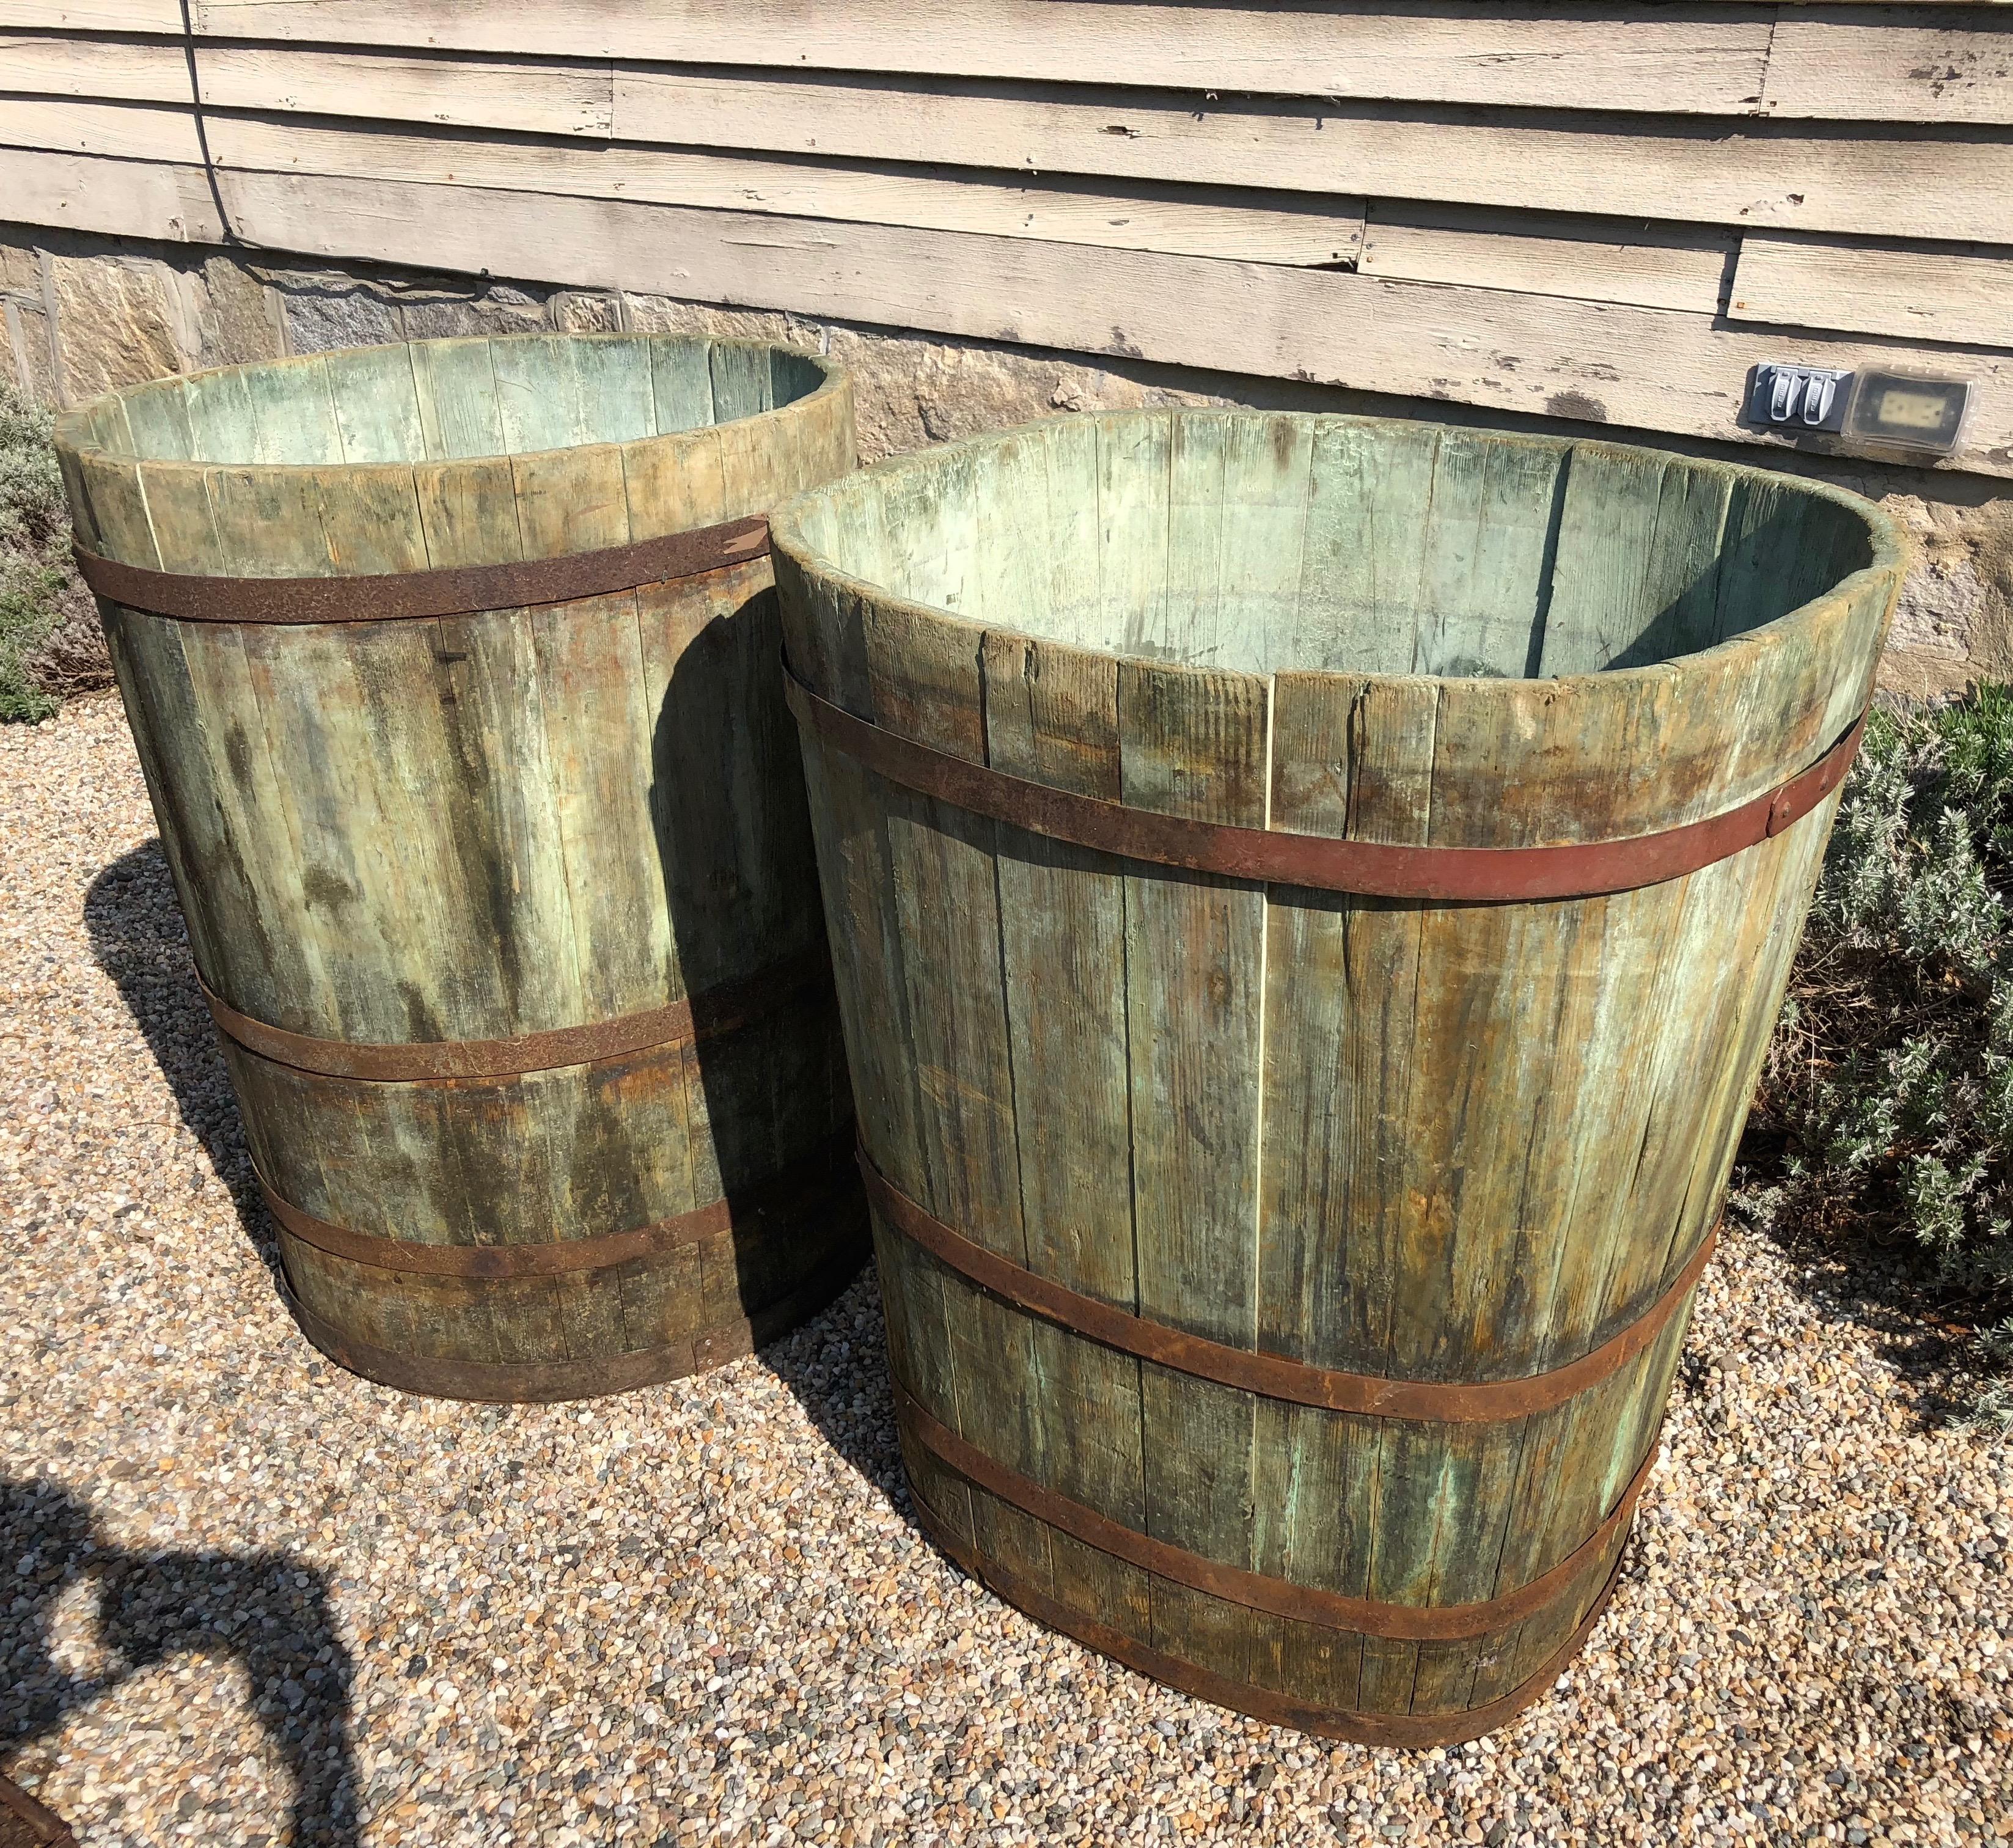 Who could resist the stunning green color of these master grape collection tubs from Alsace? Certainly not us, although they are not a true pair. One is round and the other a squared oval, but they do work quite well together, especially if used to